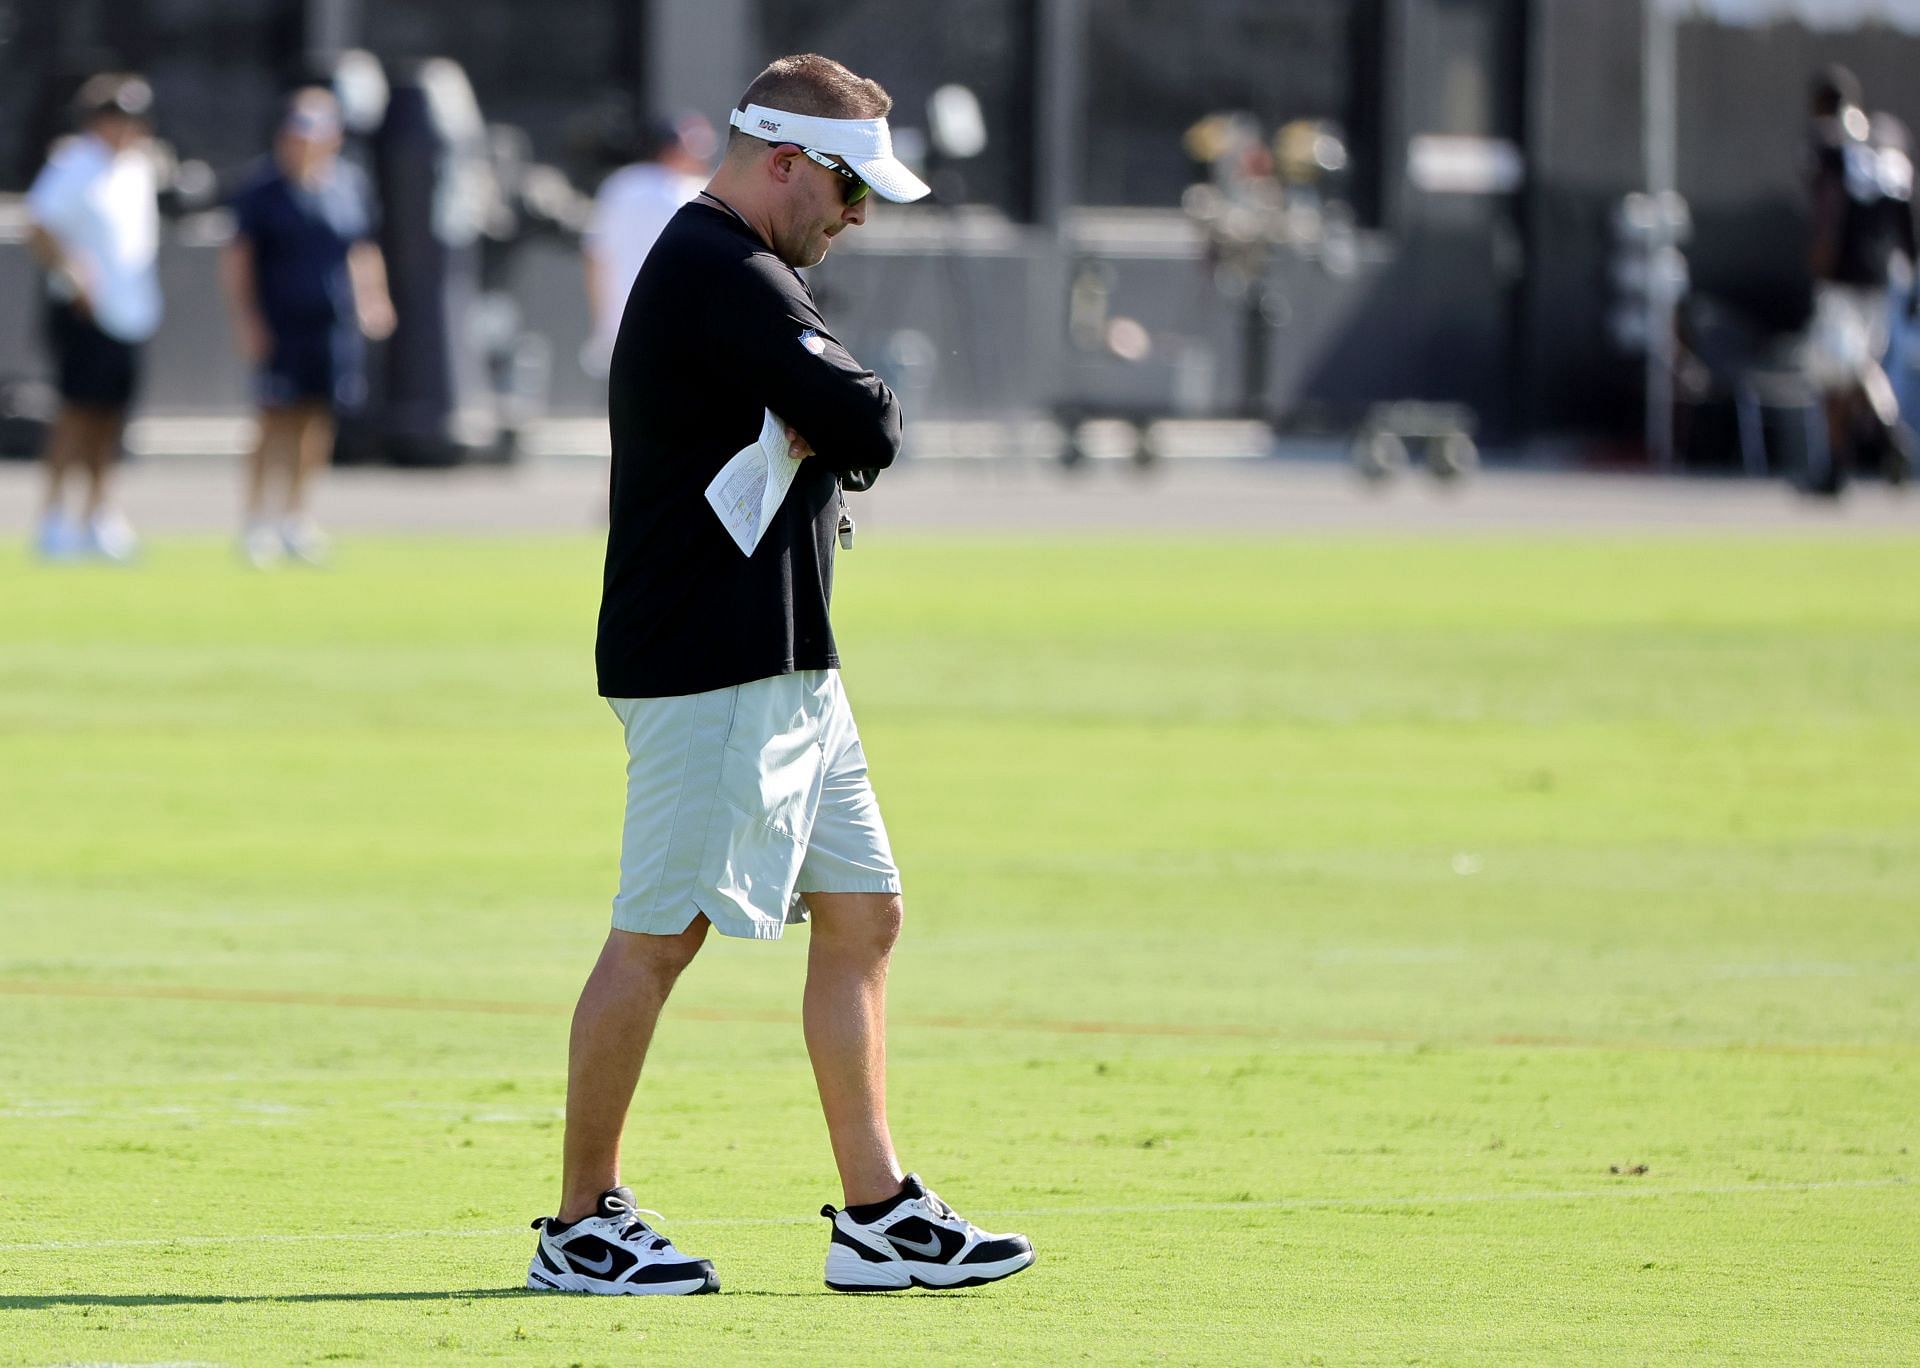 Las Vegas Raiders Hold Joint Practices With New England Patriots